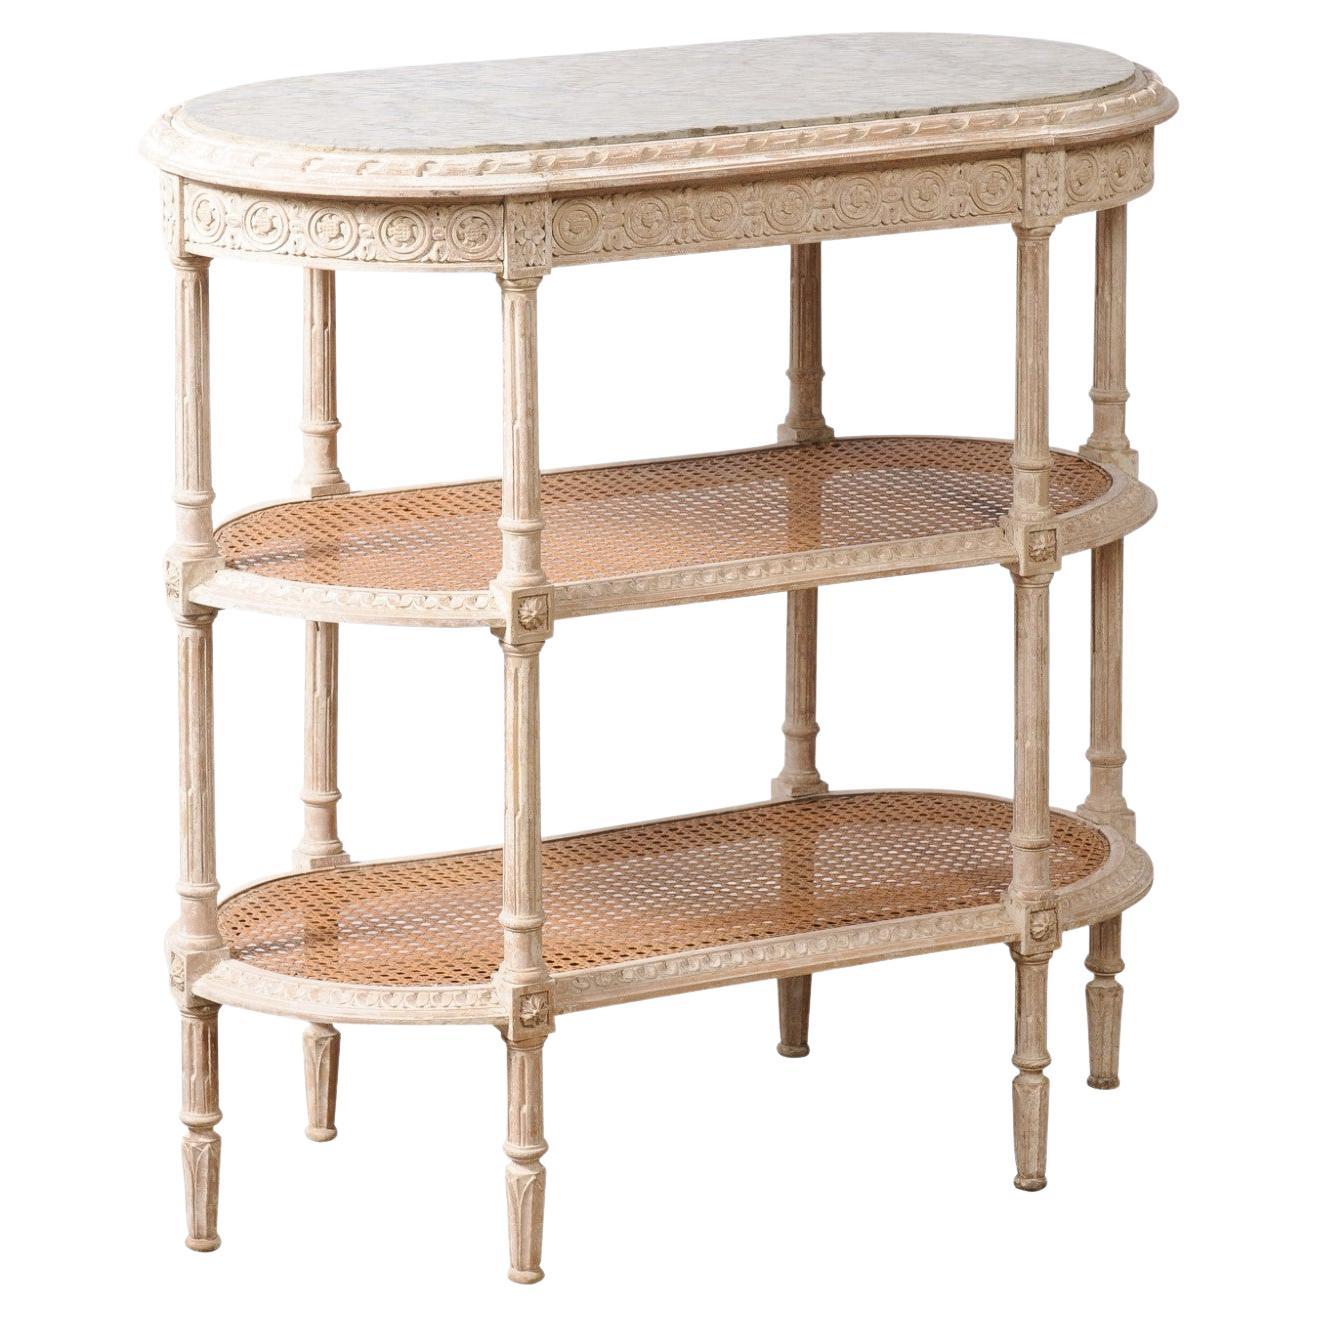 French Louis XVI Style 19th Century Tiered Table with Marble Top and Caning For Sale